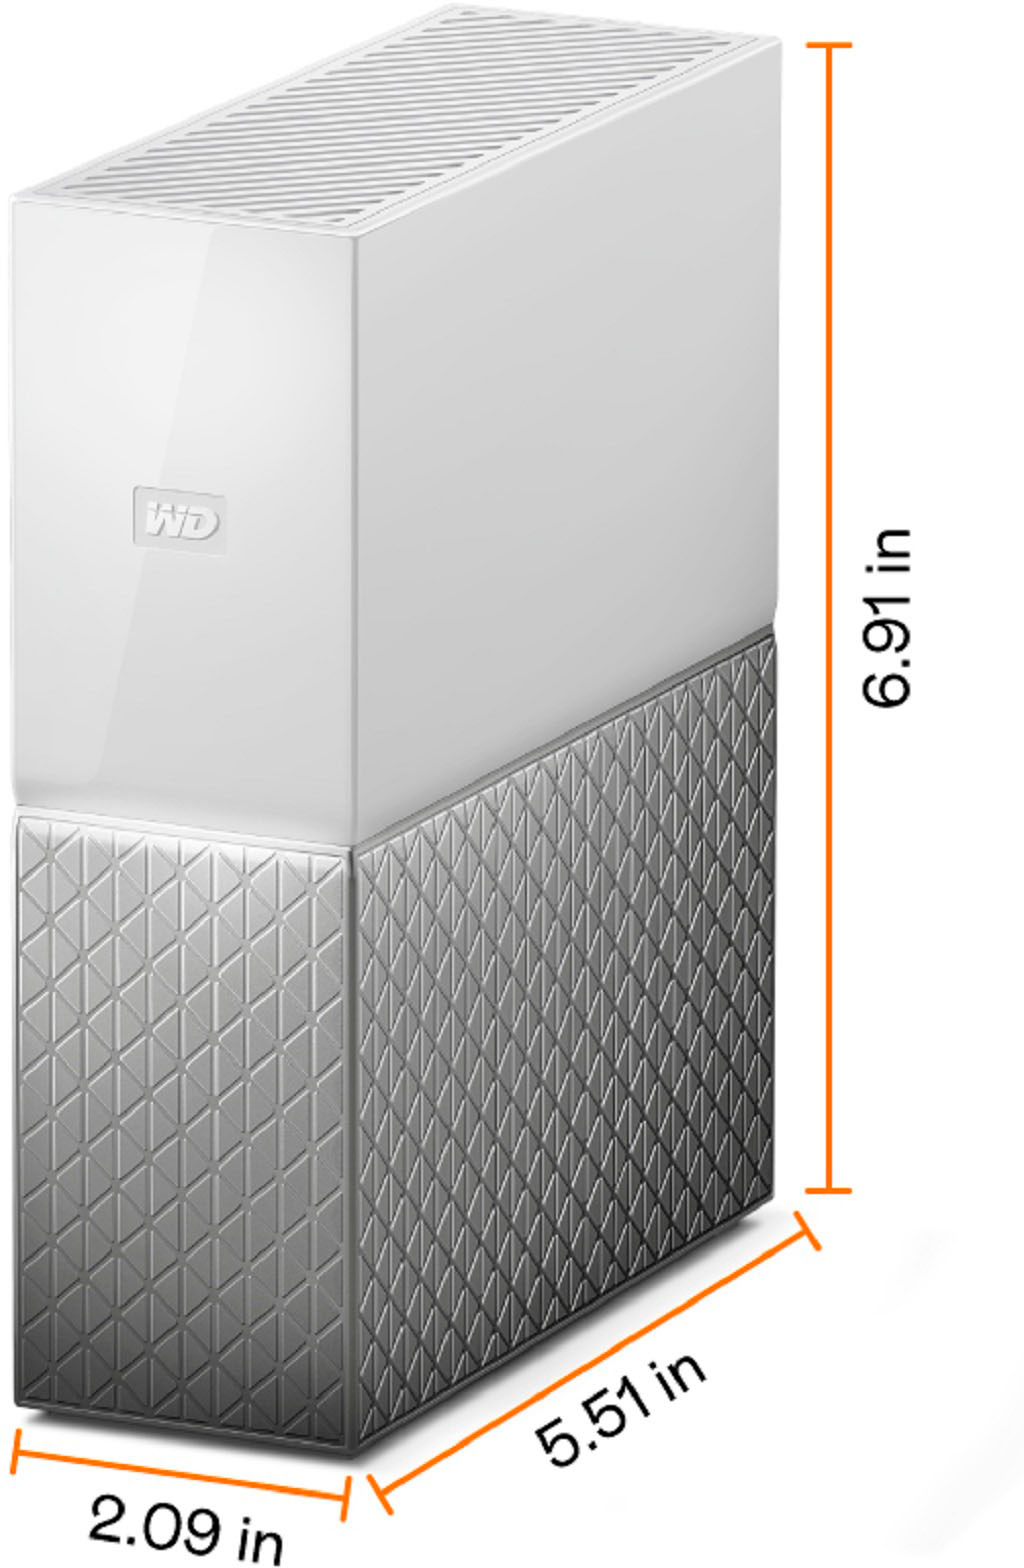 Angle View: Seagate - IronWolf 8TB Internal SATA NAS Hard Drive with Rescue Data Recovery Services